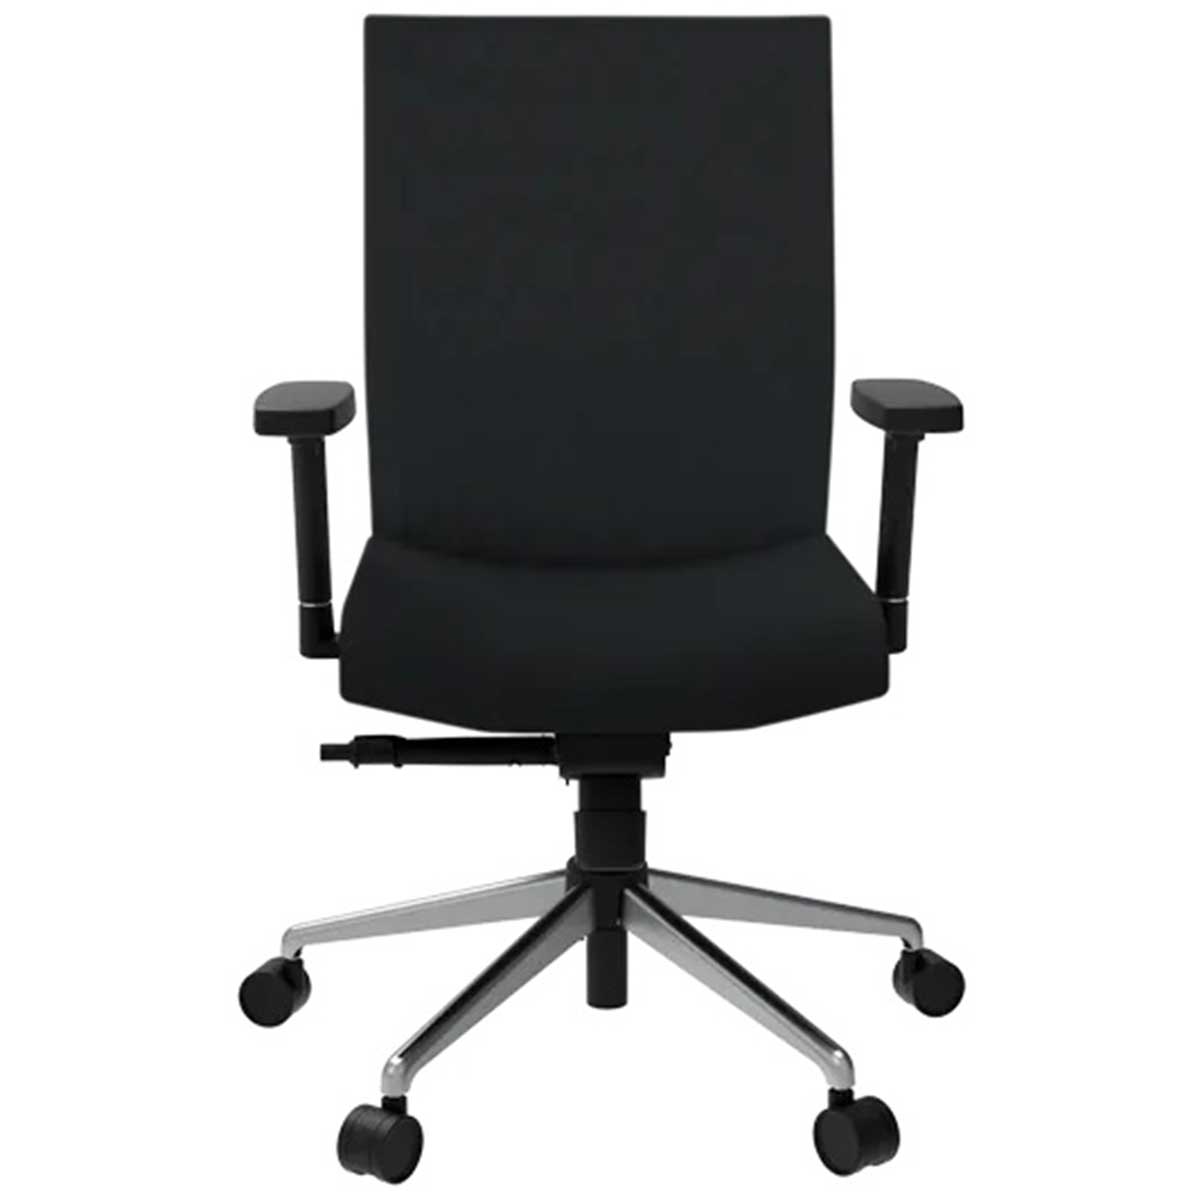 Staff Chair Manufacturers, Suppliers in Lawrence Road